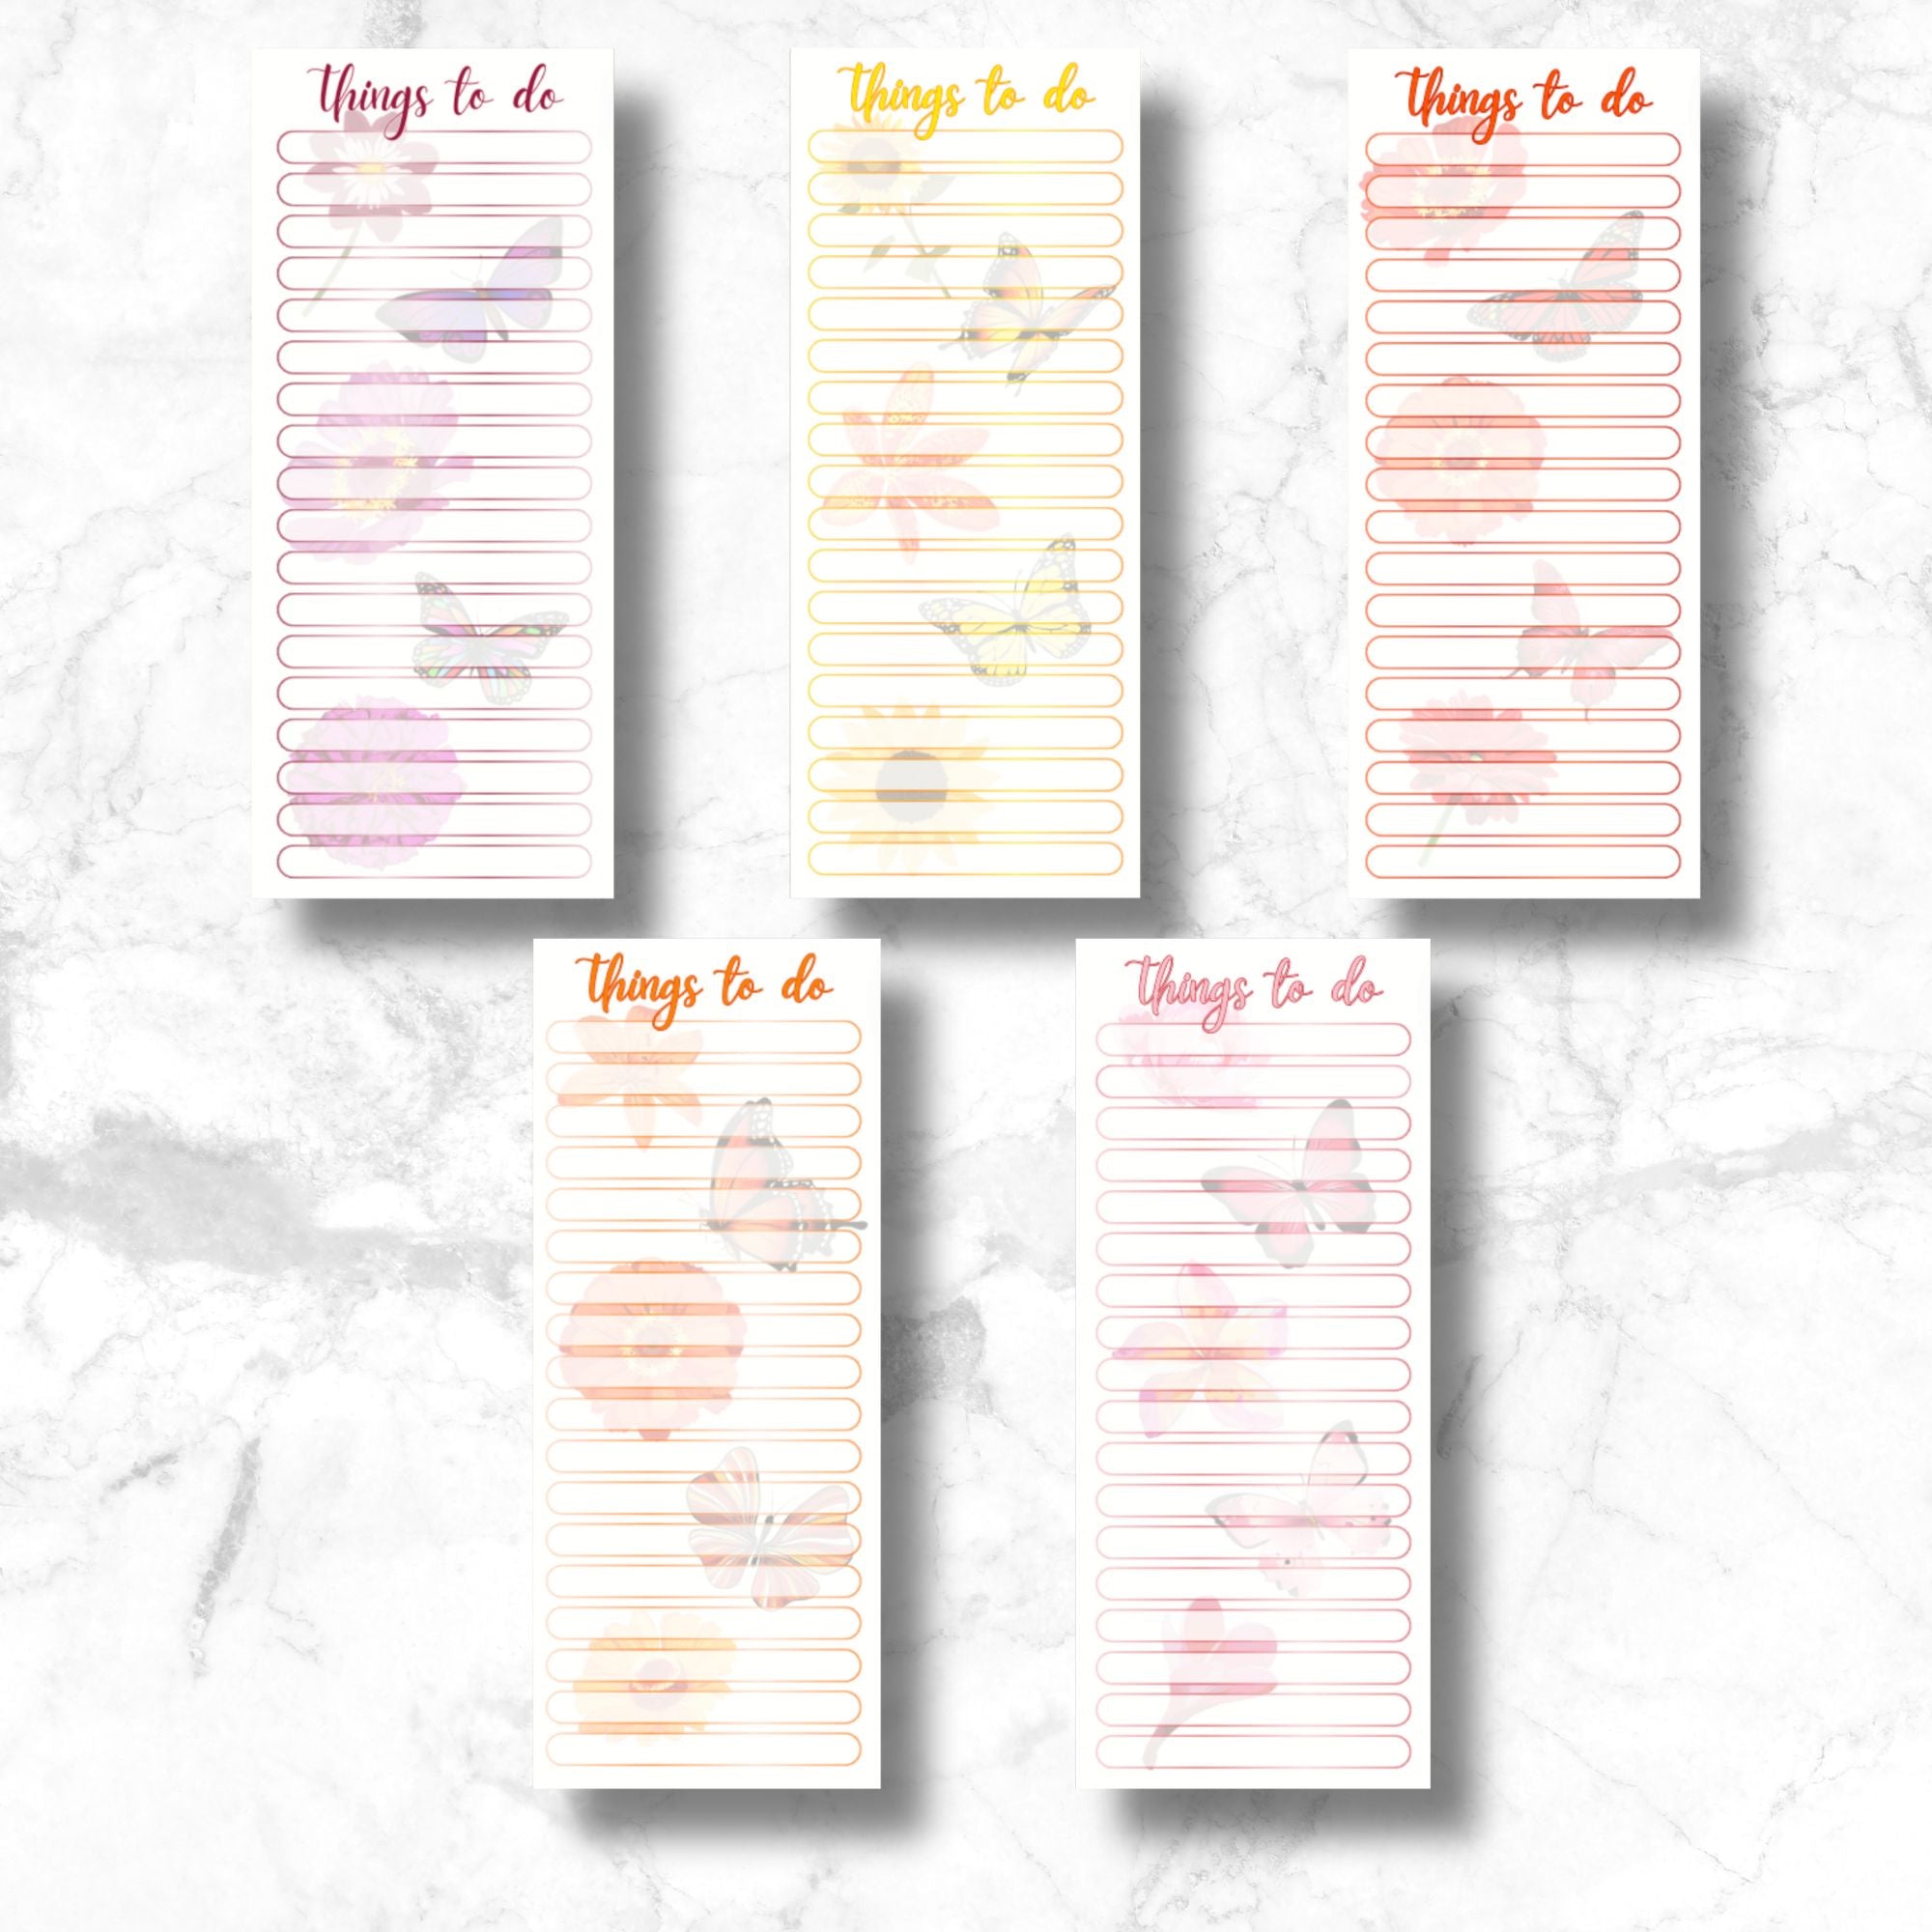 This image shows the 5 different designs/pages included in the Things to do Notepad - Butterflies and Flowers.